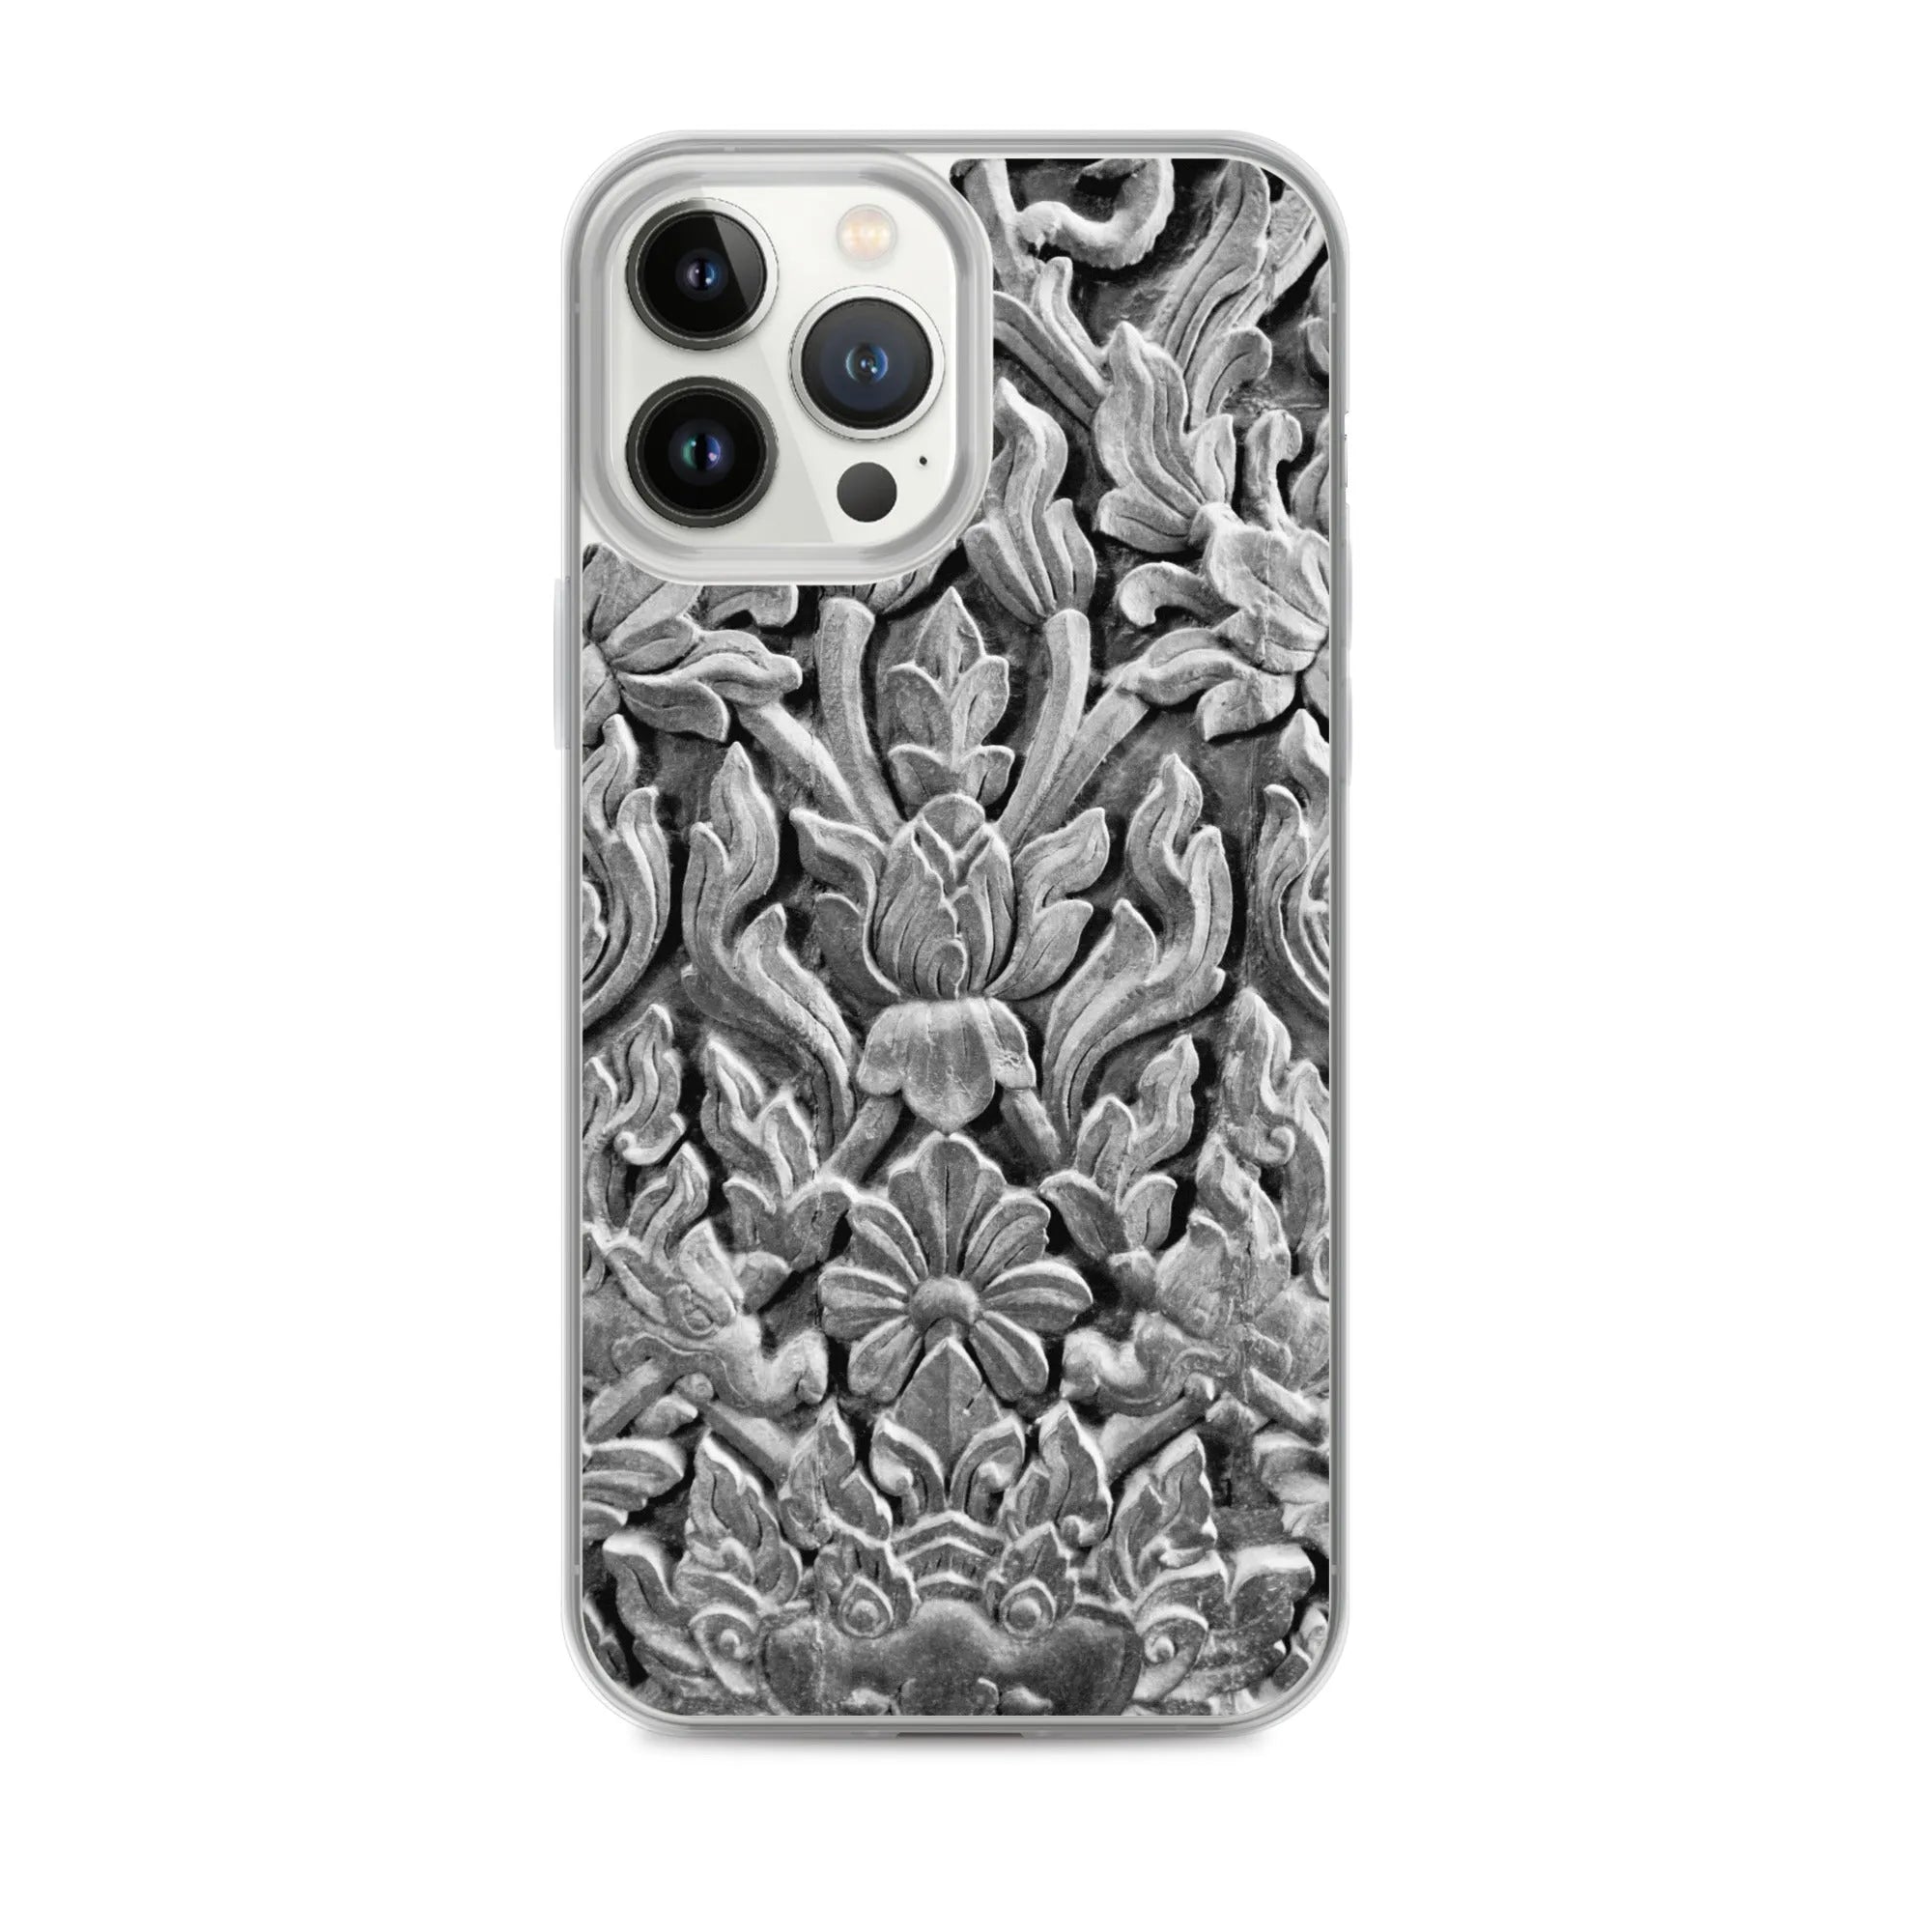 Dragon’s Den Pattern Iphone Case - Black And White - Iphone 13 Pro Max - Mobile Phone Cases - Aesthetic Art